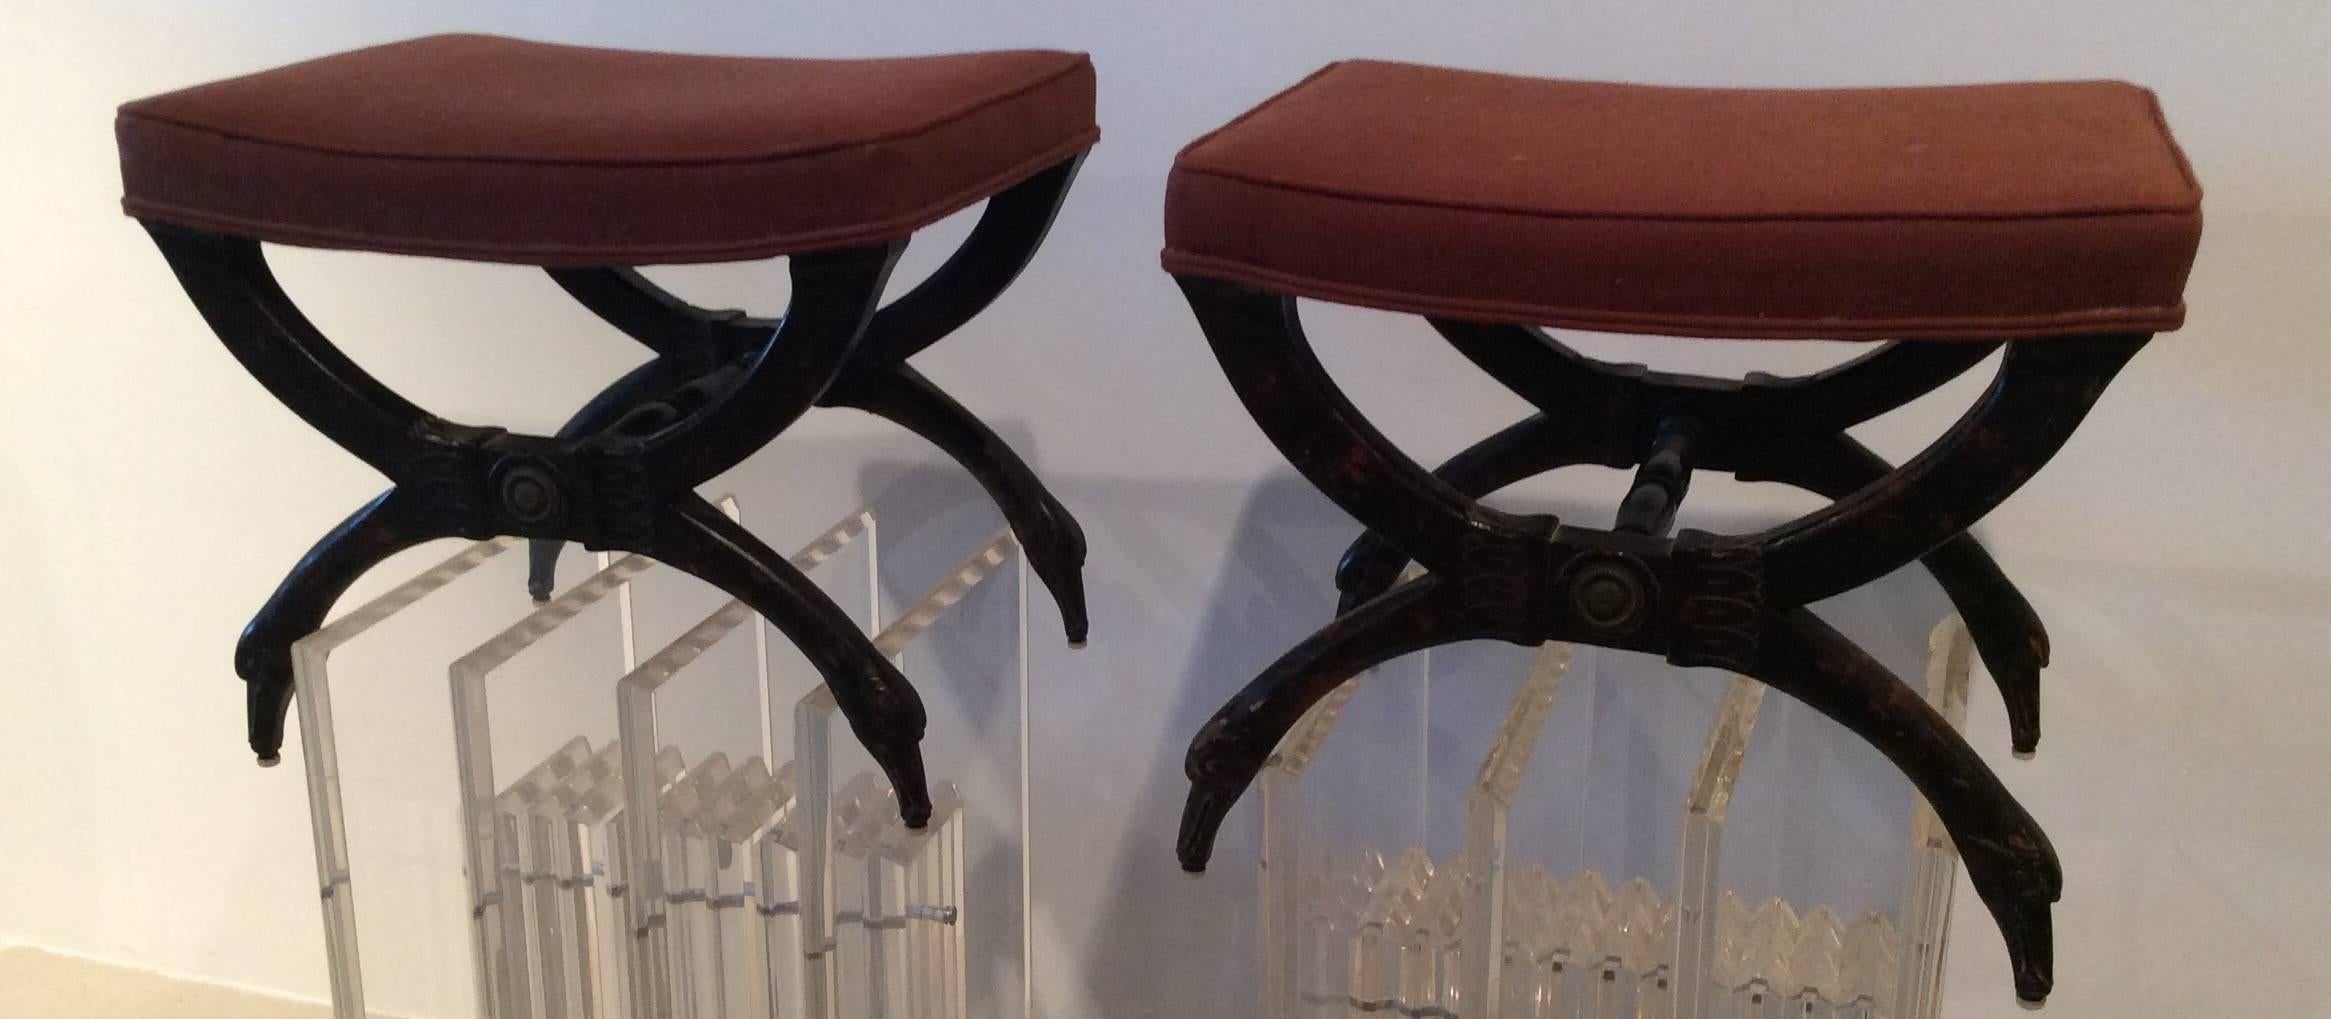 Lovely Dorothy Draper Palm Beach Style vintage pair of Vintage wood X benches with (birds) swan head legs, ornate carved details. Original fabric has some spots on one of the benches. Lovely Hollywood Regency Style.

